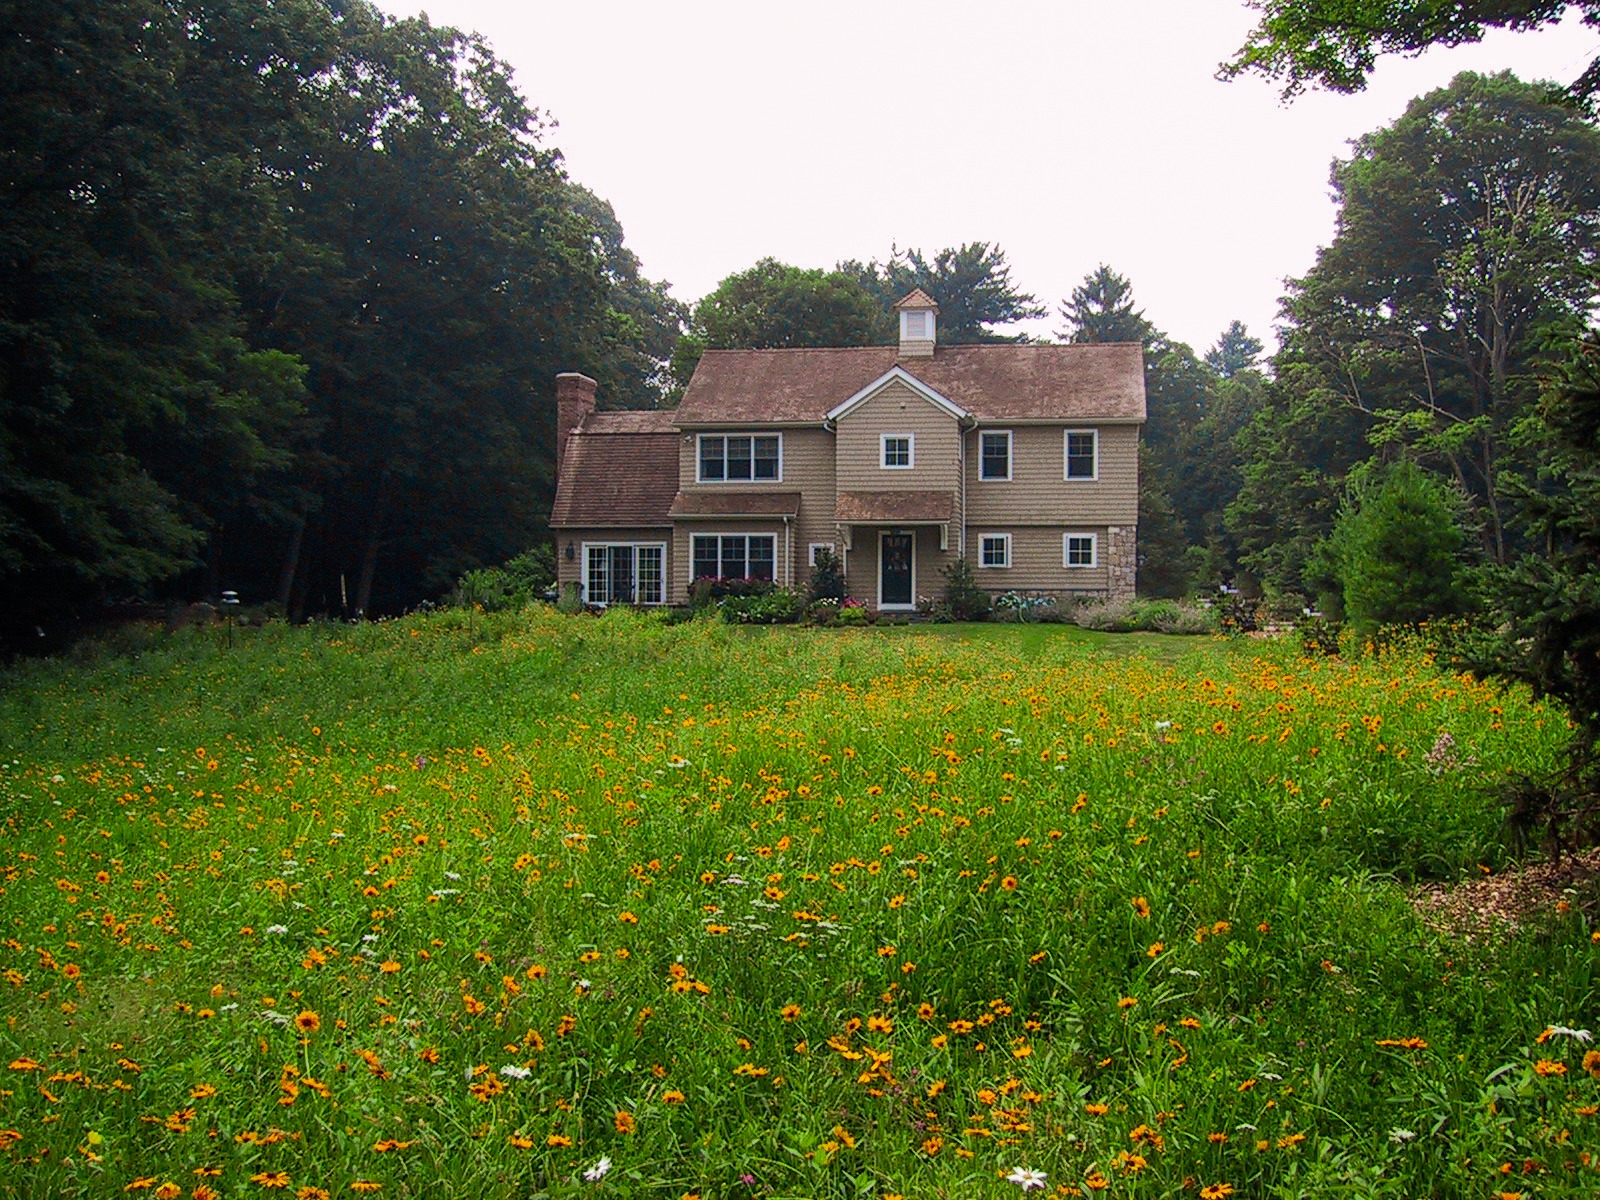 A traditional two-story house with a shingled exterior is nestled among lush trees with a field of wildflowers in the foreground.